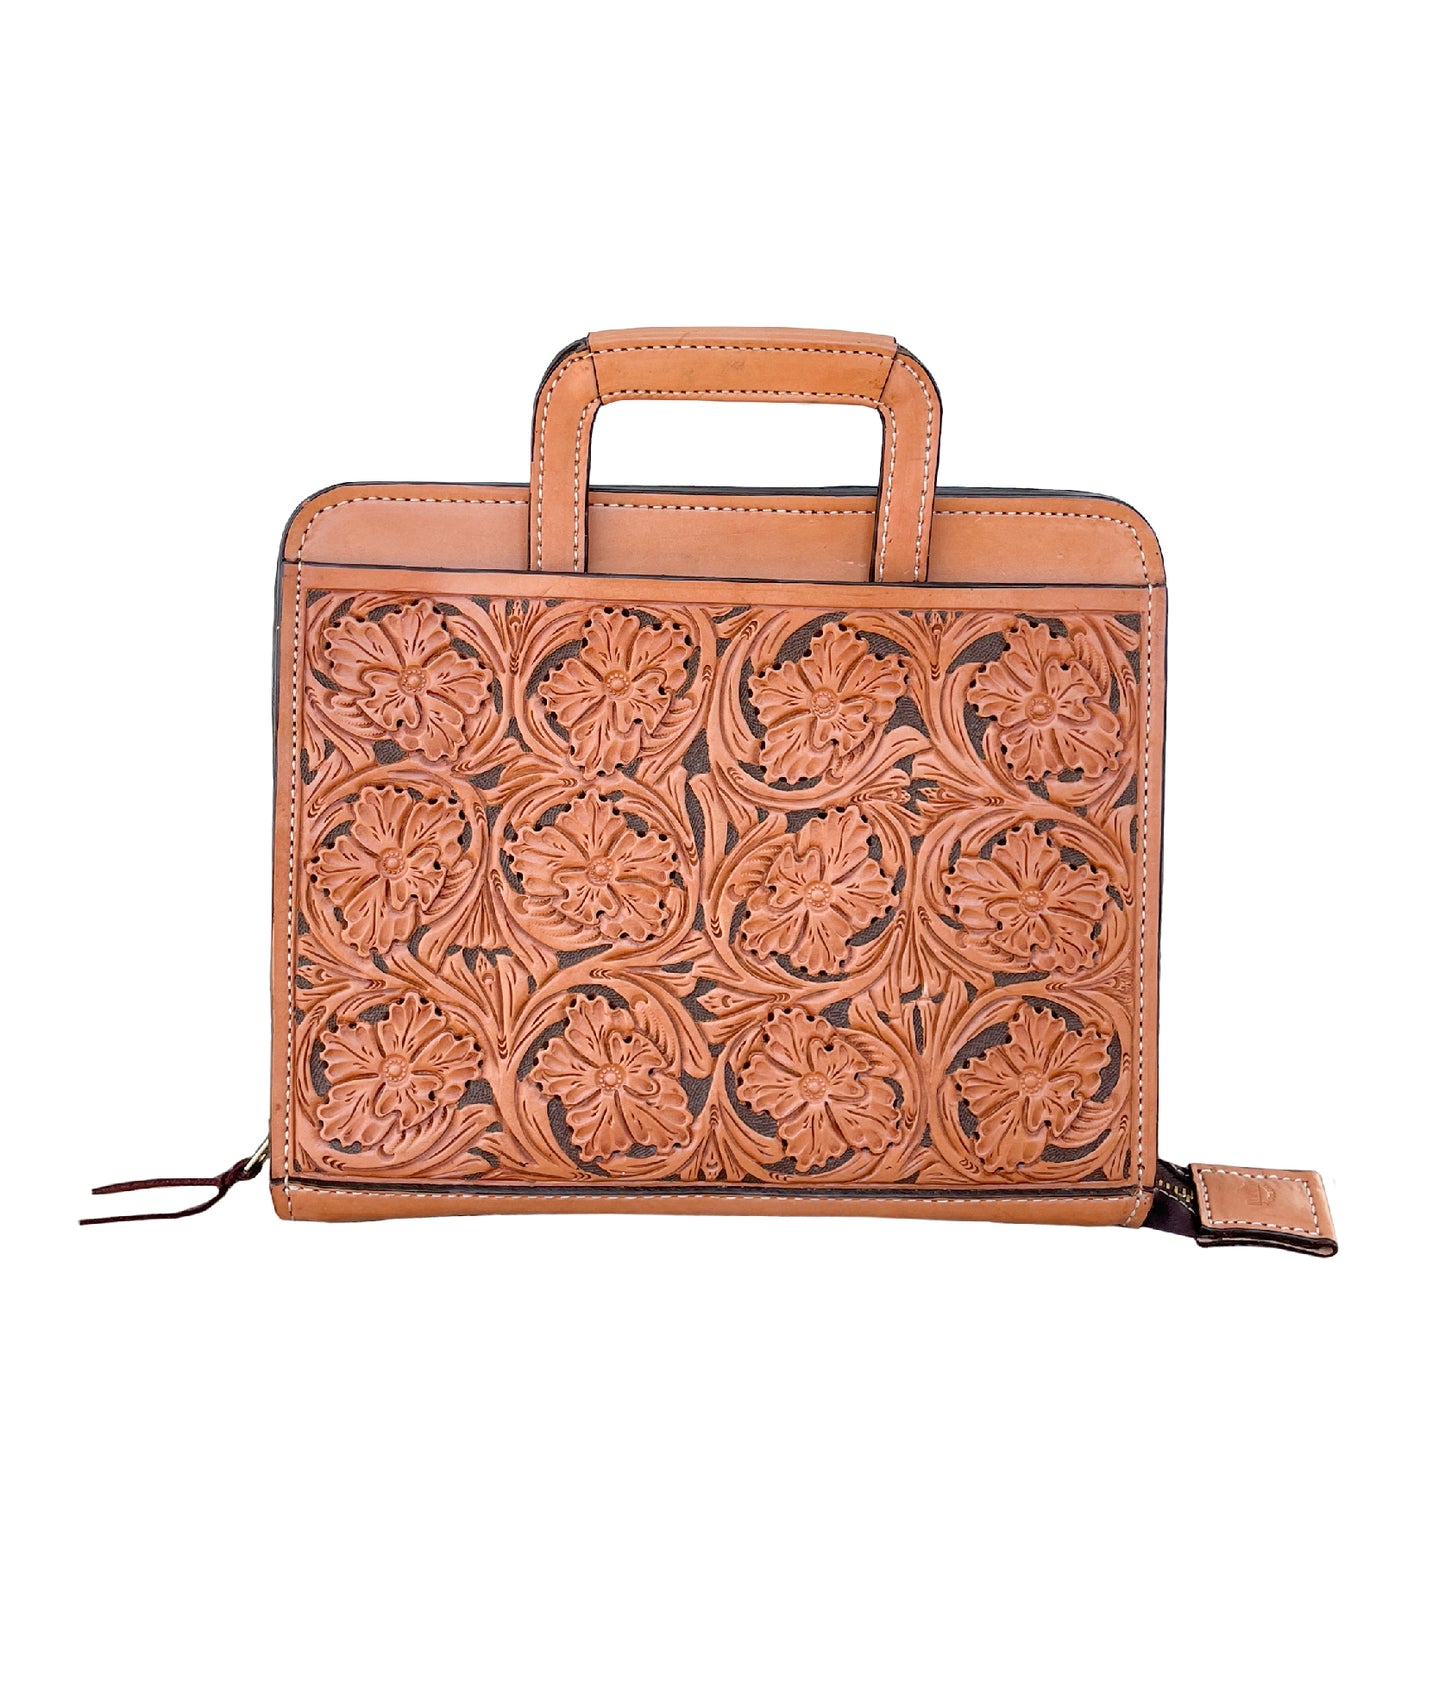 Cowboy Briefcase golden wild rose tooling with background paint and an antique finish